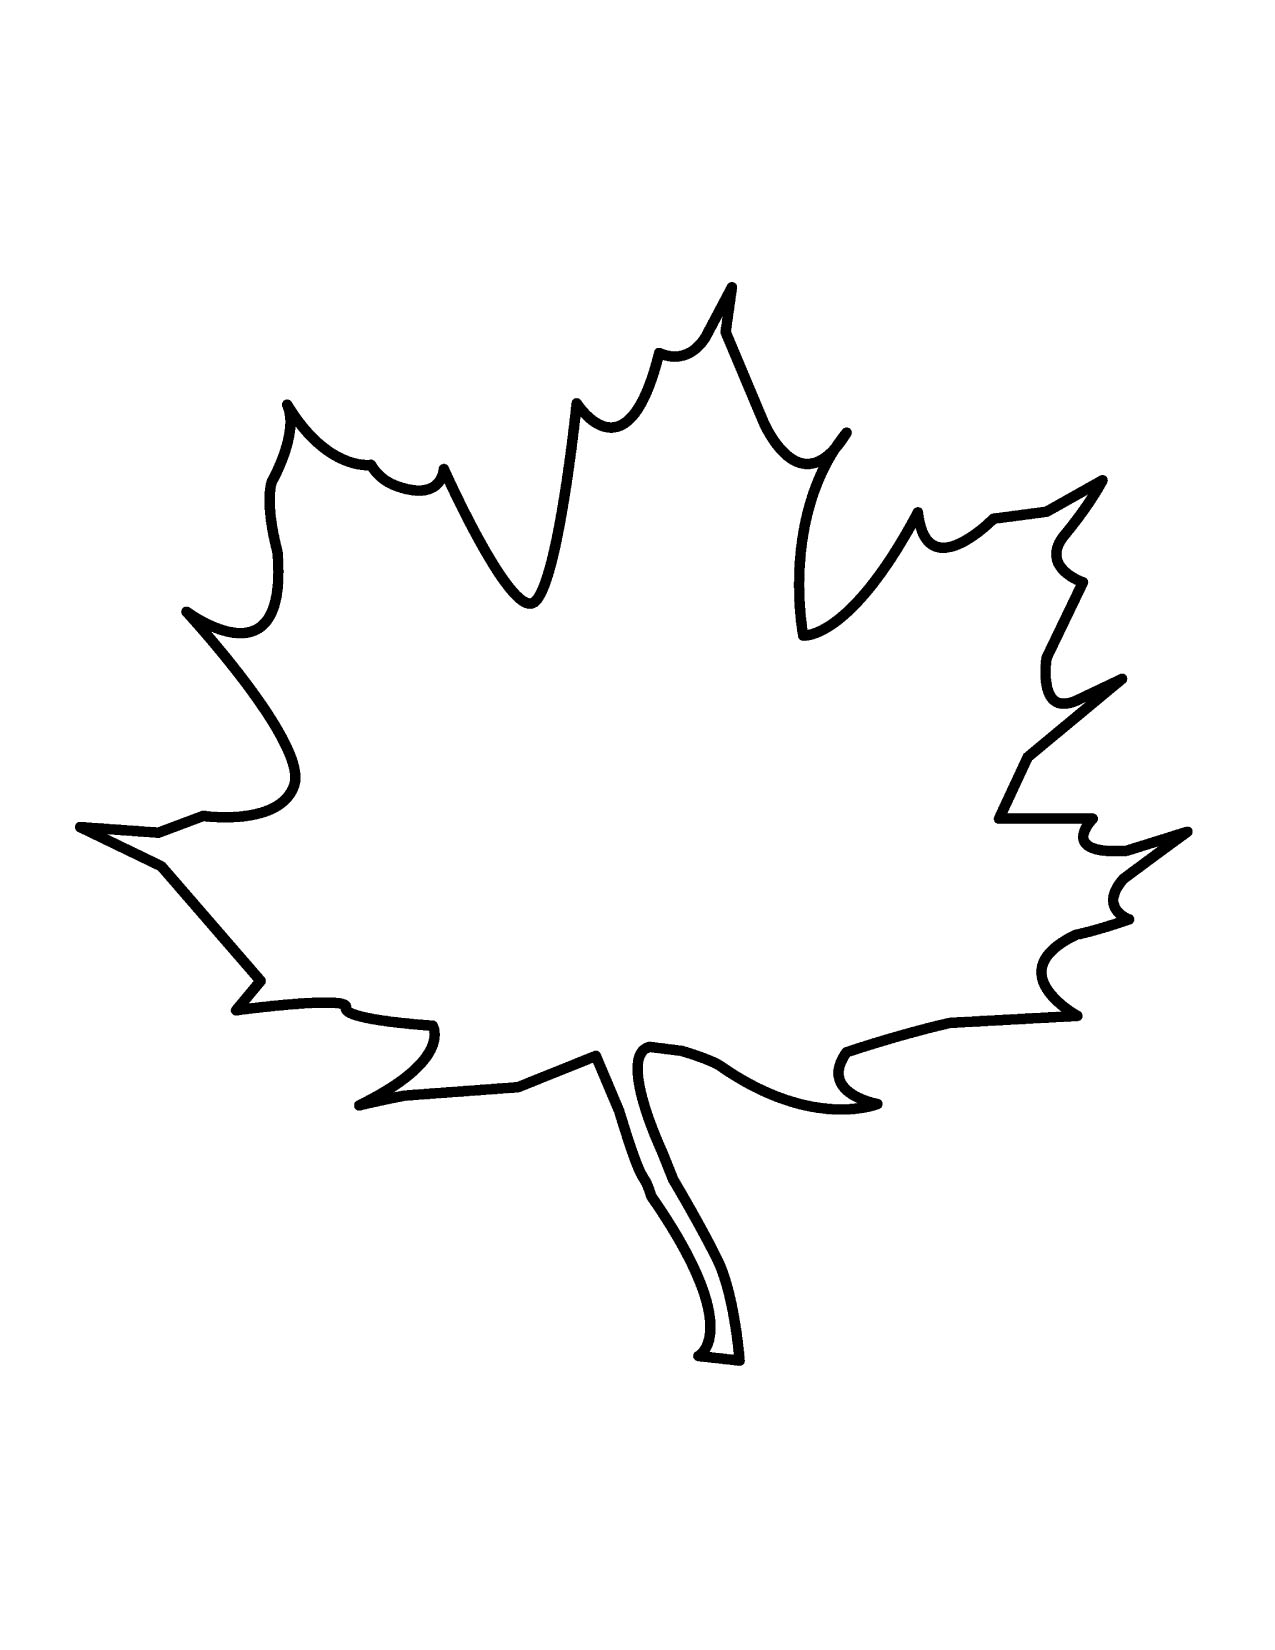 Outline Of Maple Leaf - ClipArt Best